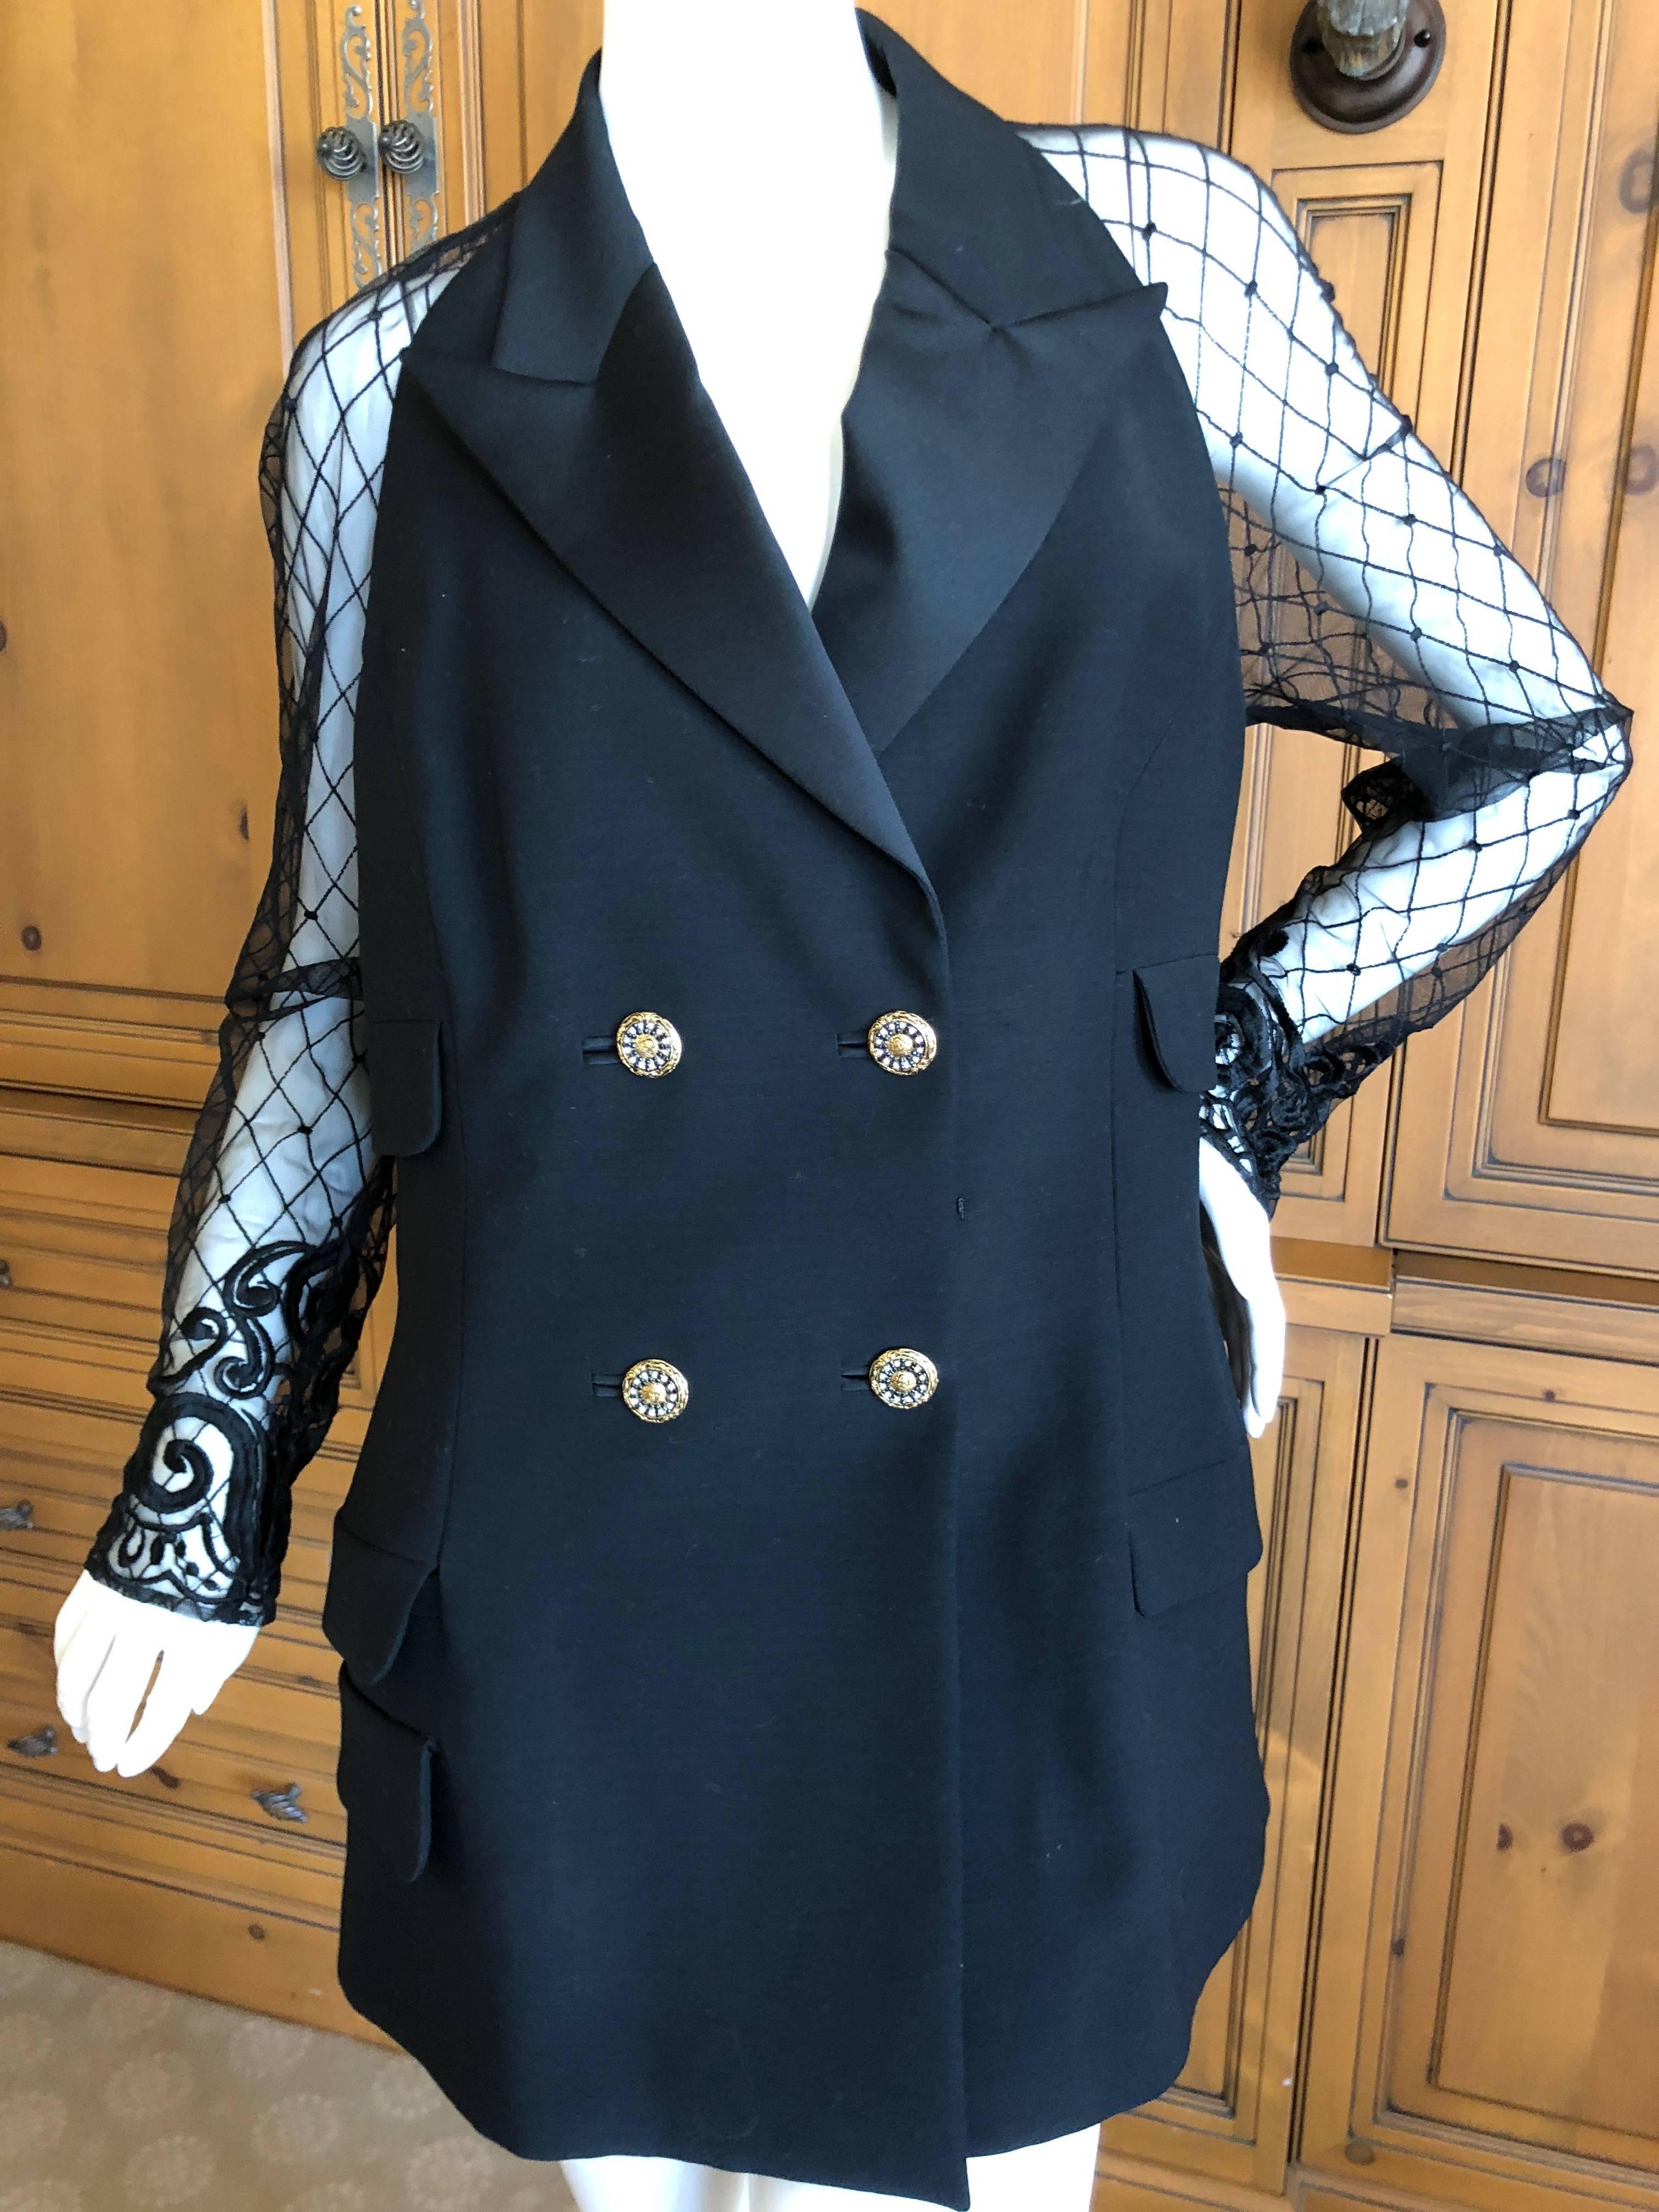  S/S 1994 Gianni Versace Couture Black Tux Jacket Sheer Baroque Lace Back & Sleeves
SO beautiful, perfect gift for  the Versace lover.
 Size 12 
Bust 42